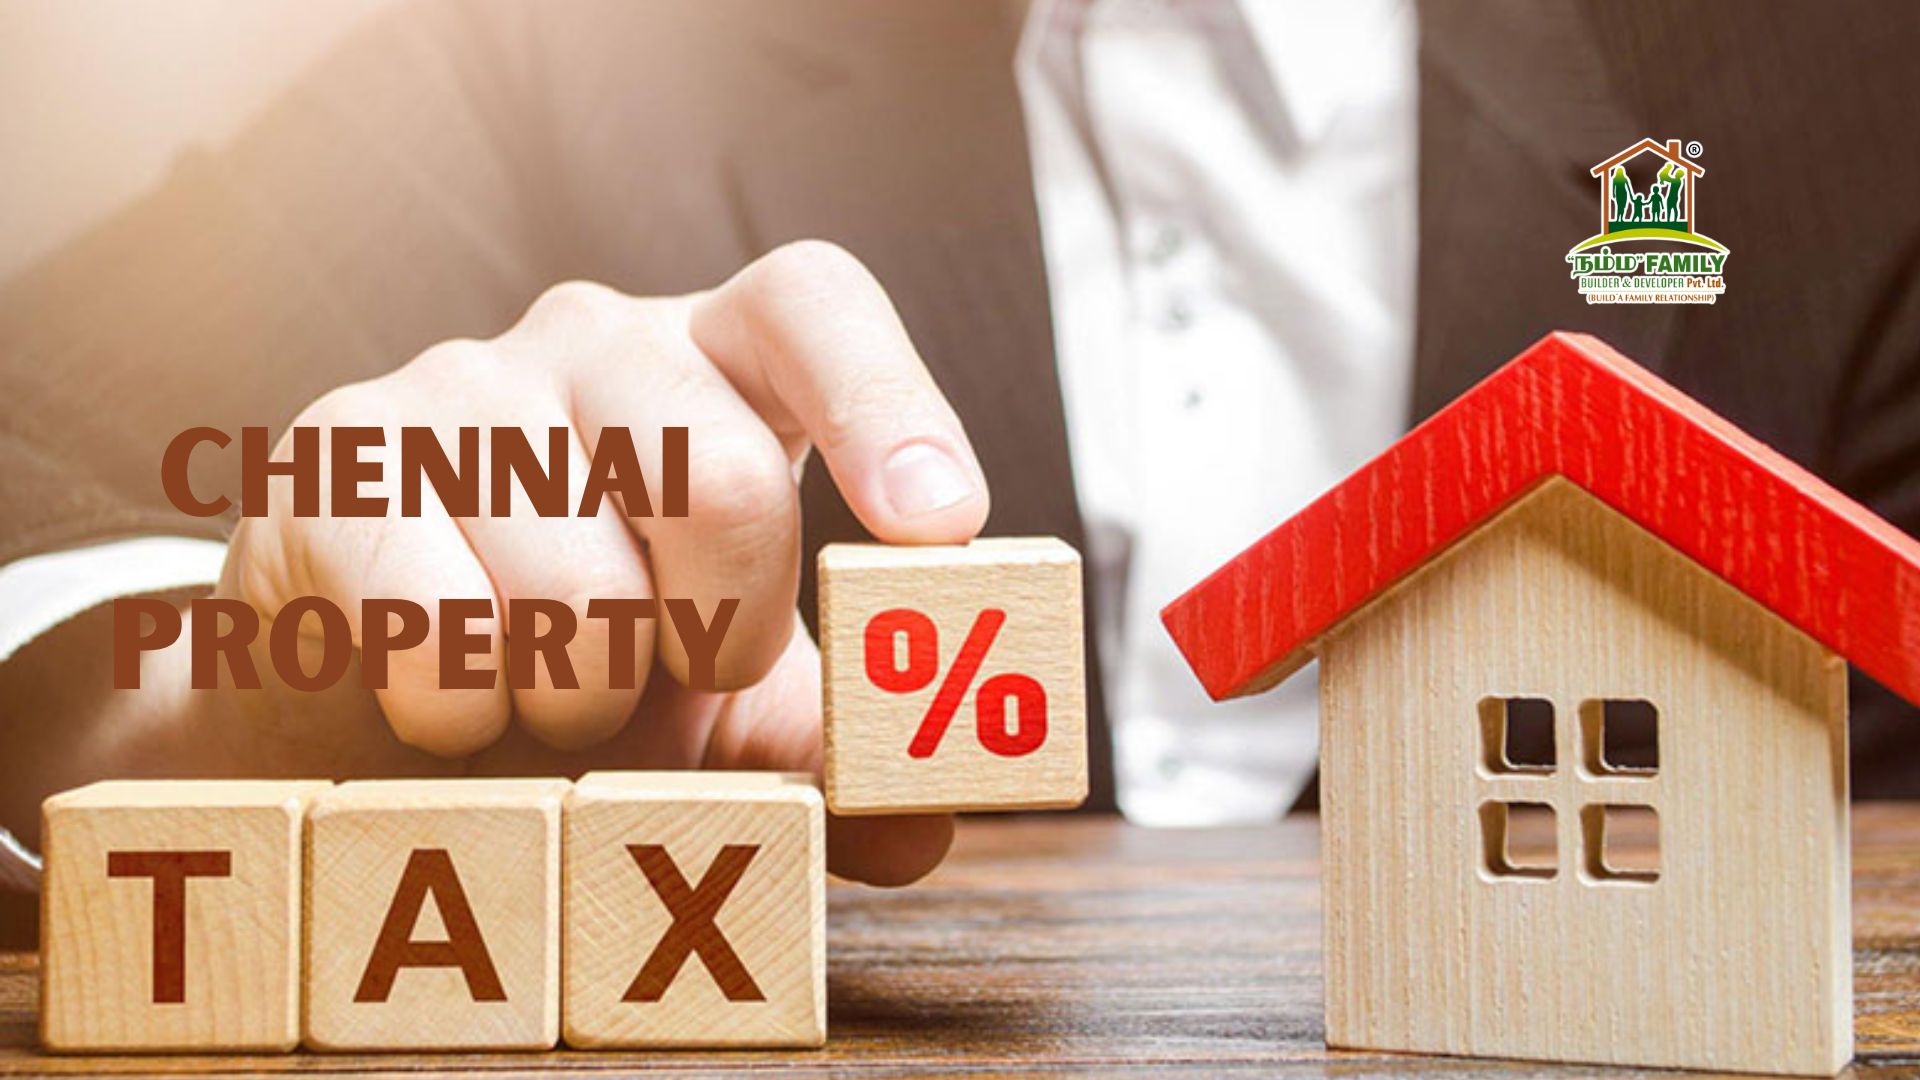 Chennai Property Tax Calculation And Payment Methods - Namma Family Builder